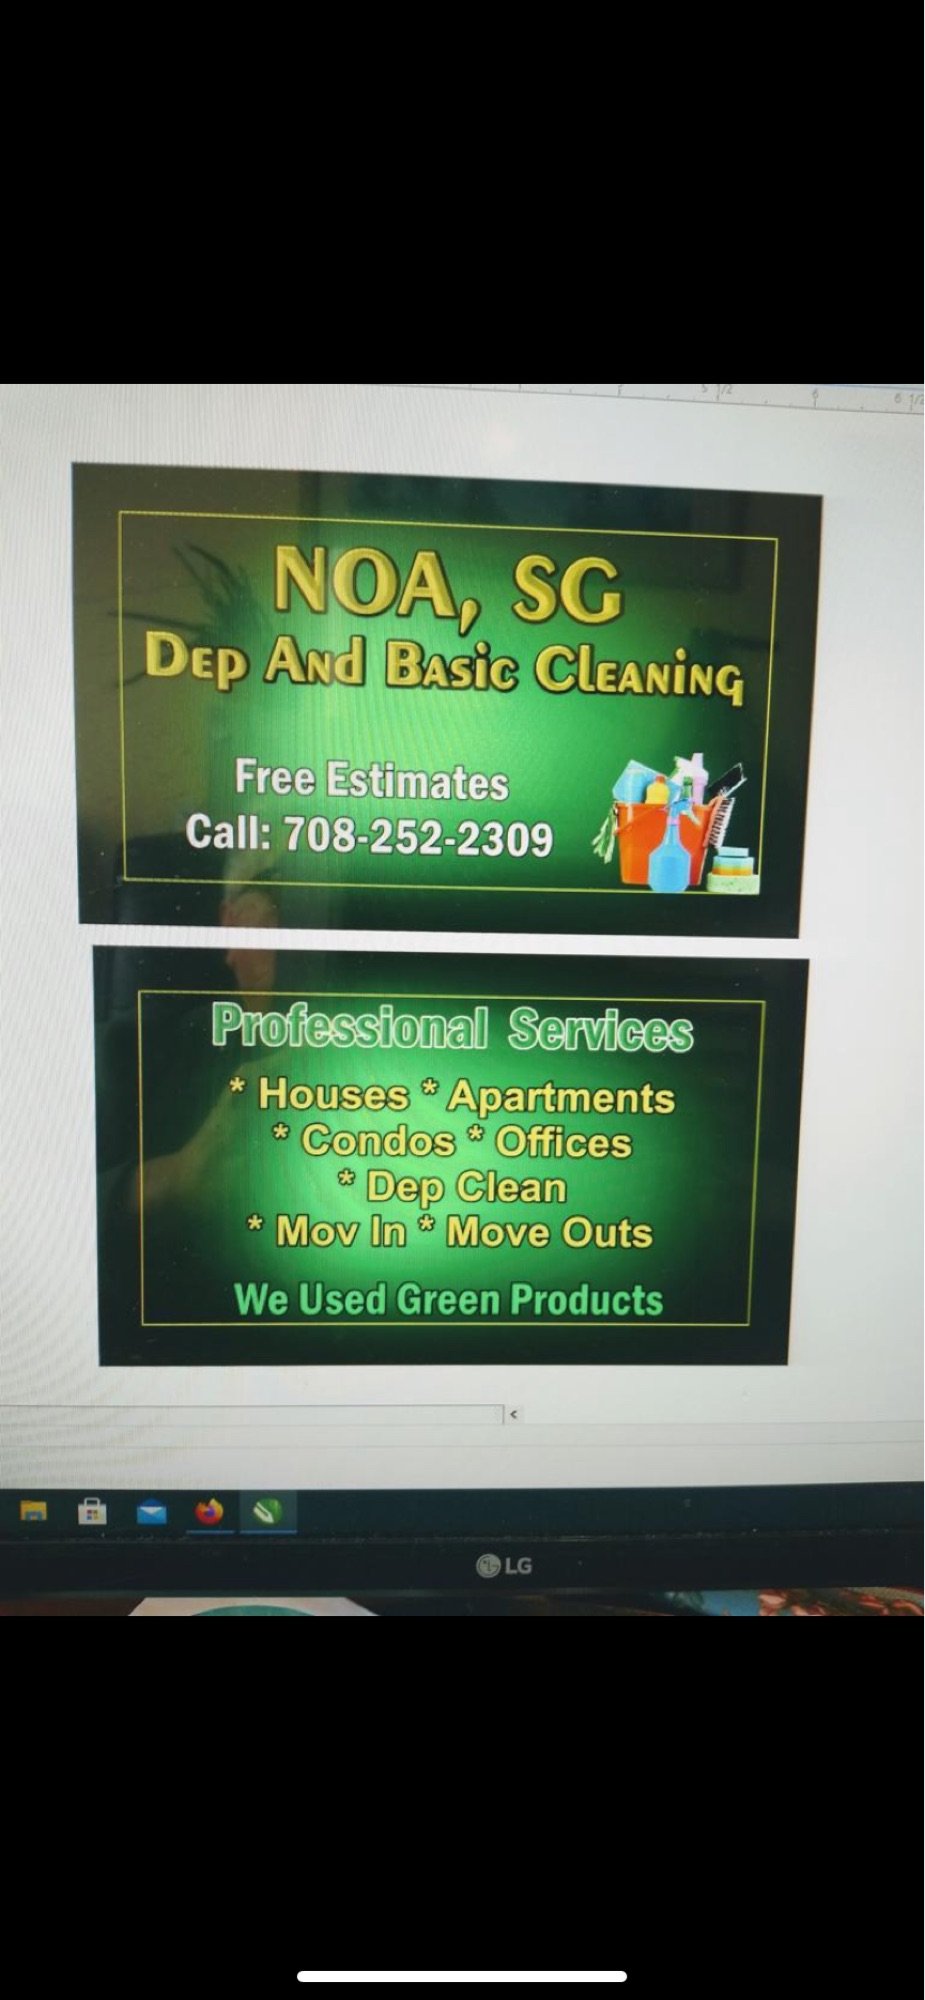 Noa's G Cleaning Service Logo